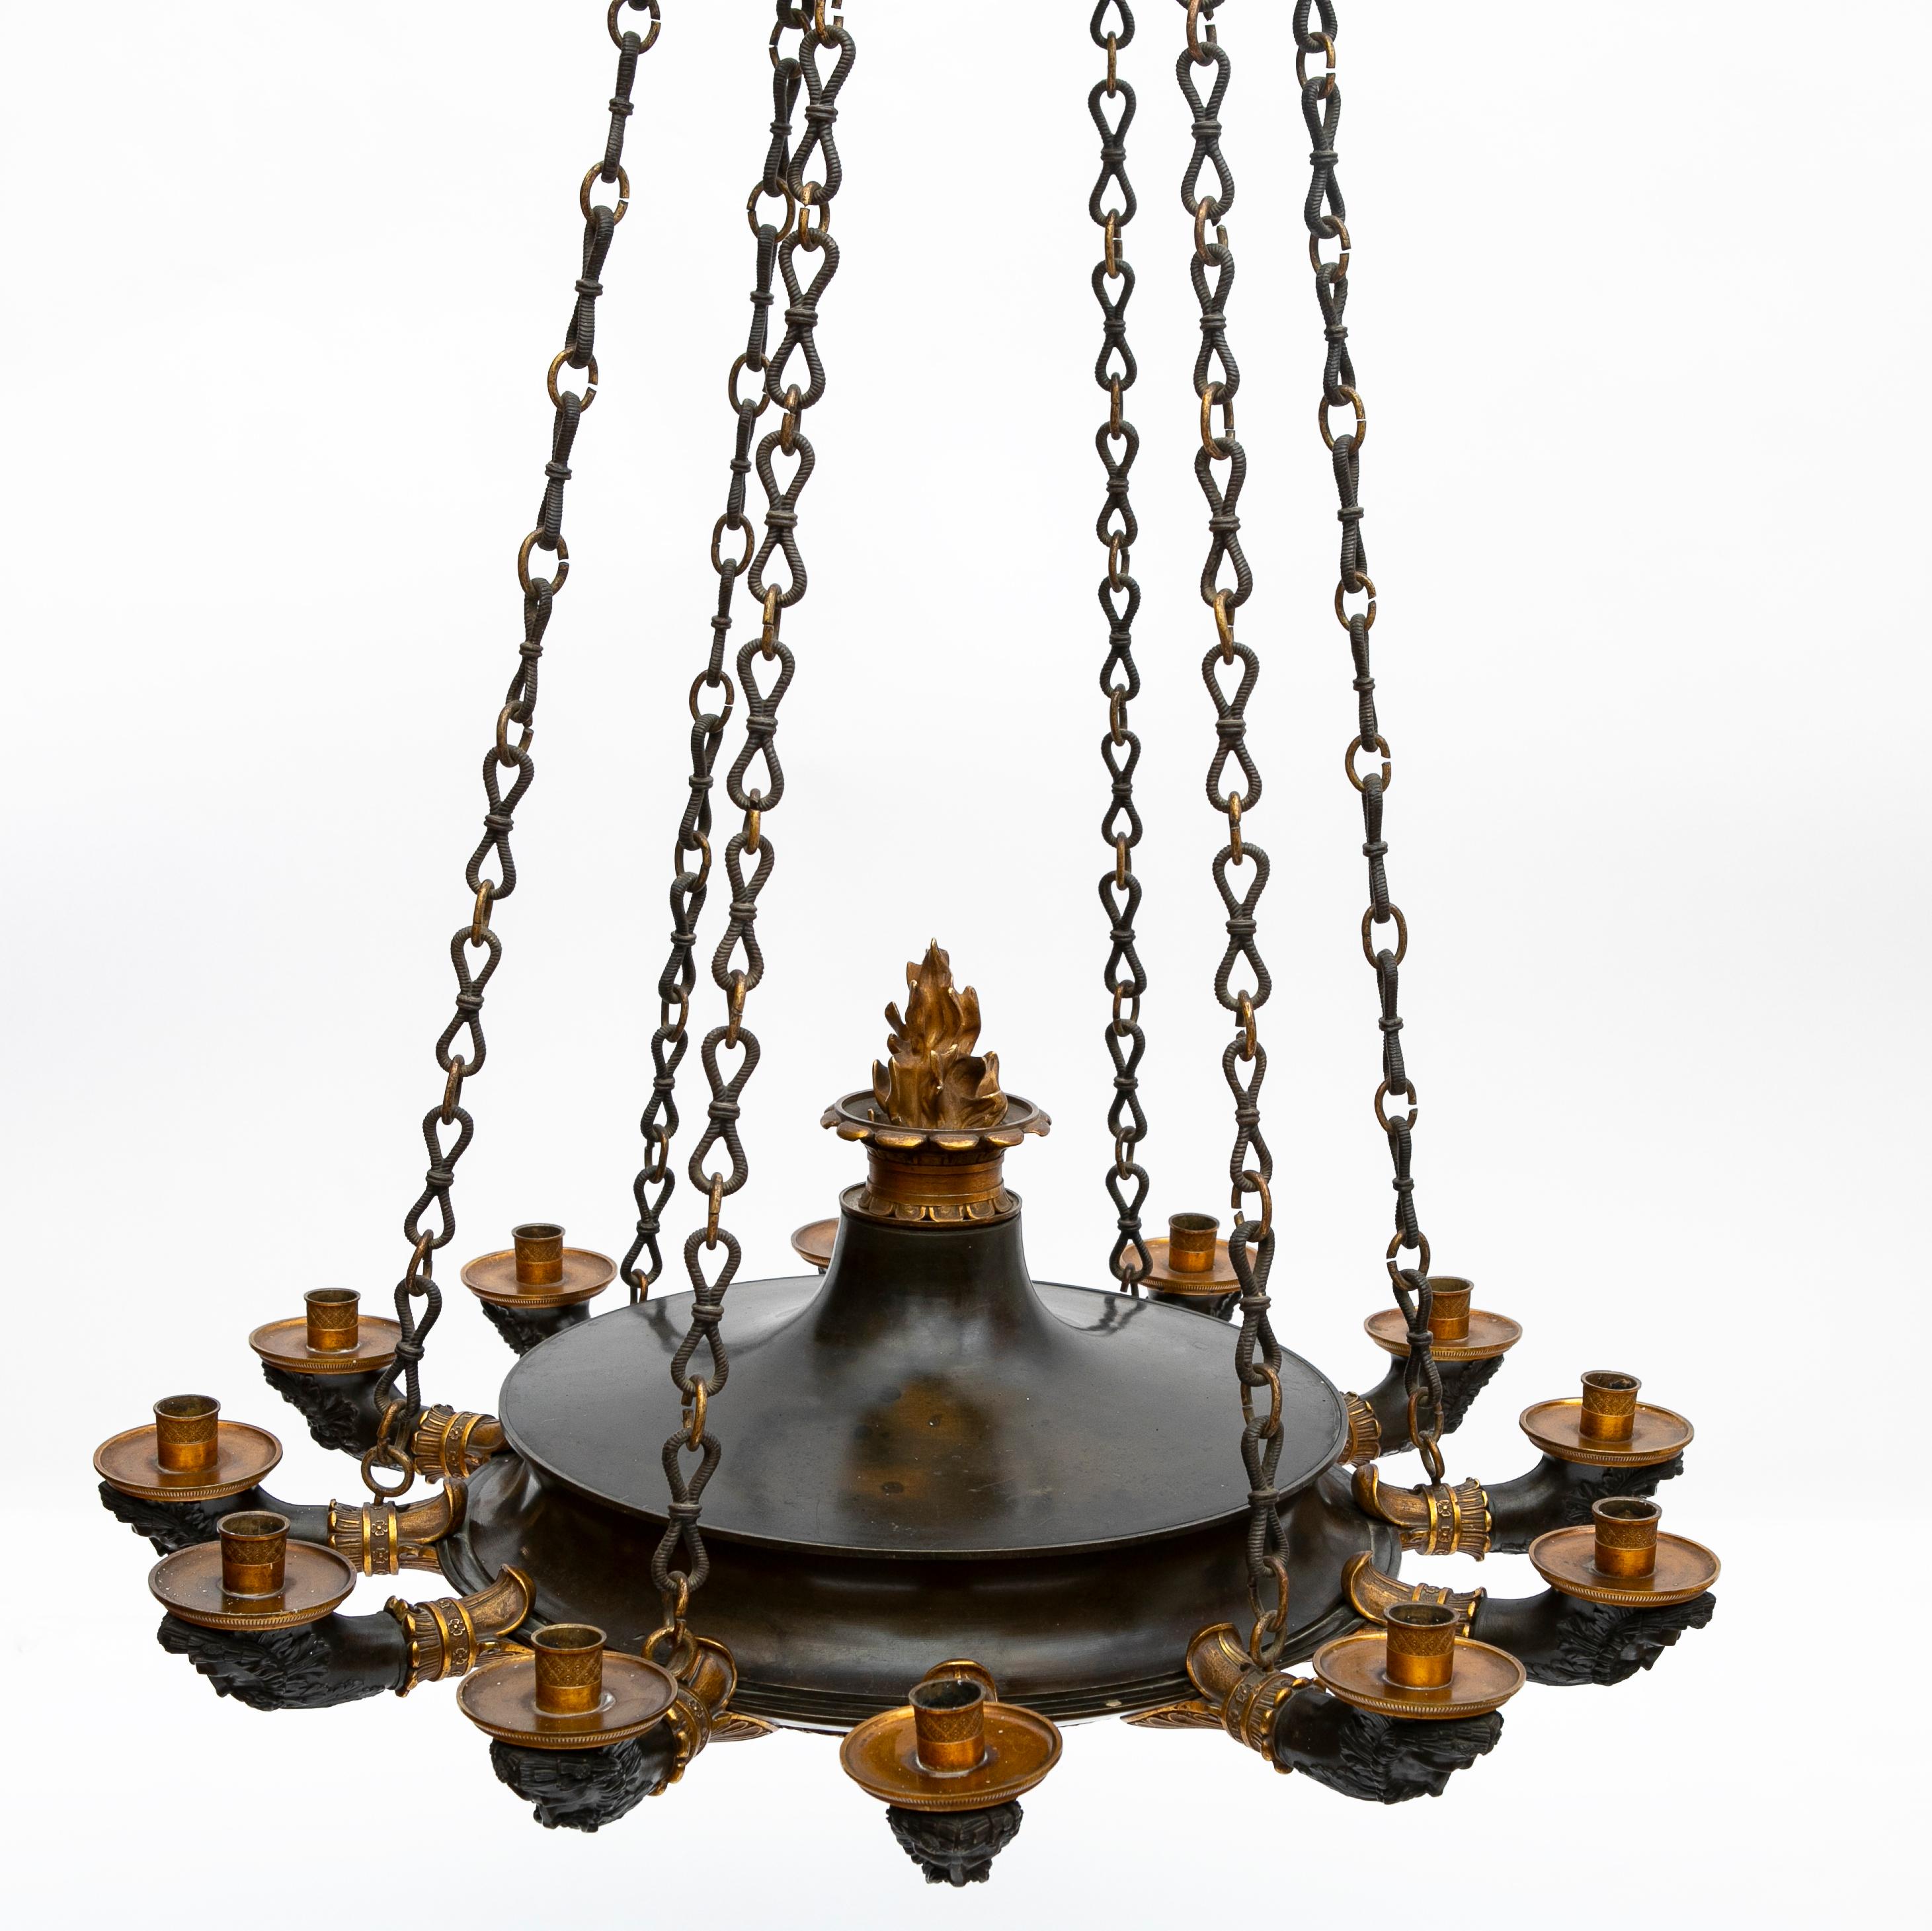 A large and very impressive 12 arm Charles X chandelier.
Made in France during the early 19th century in patinated bronze and ormulu. Rich in details with a coronet adorned with panther heads and chains hanging down to the chandelier that has twelve